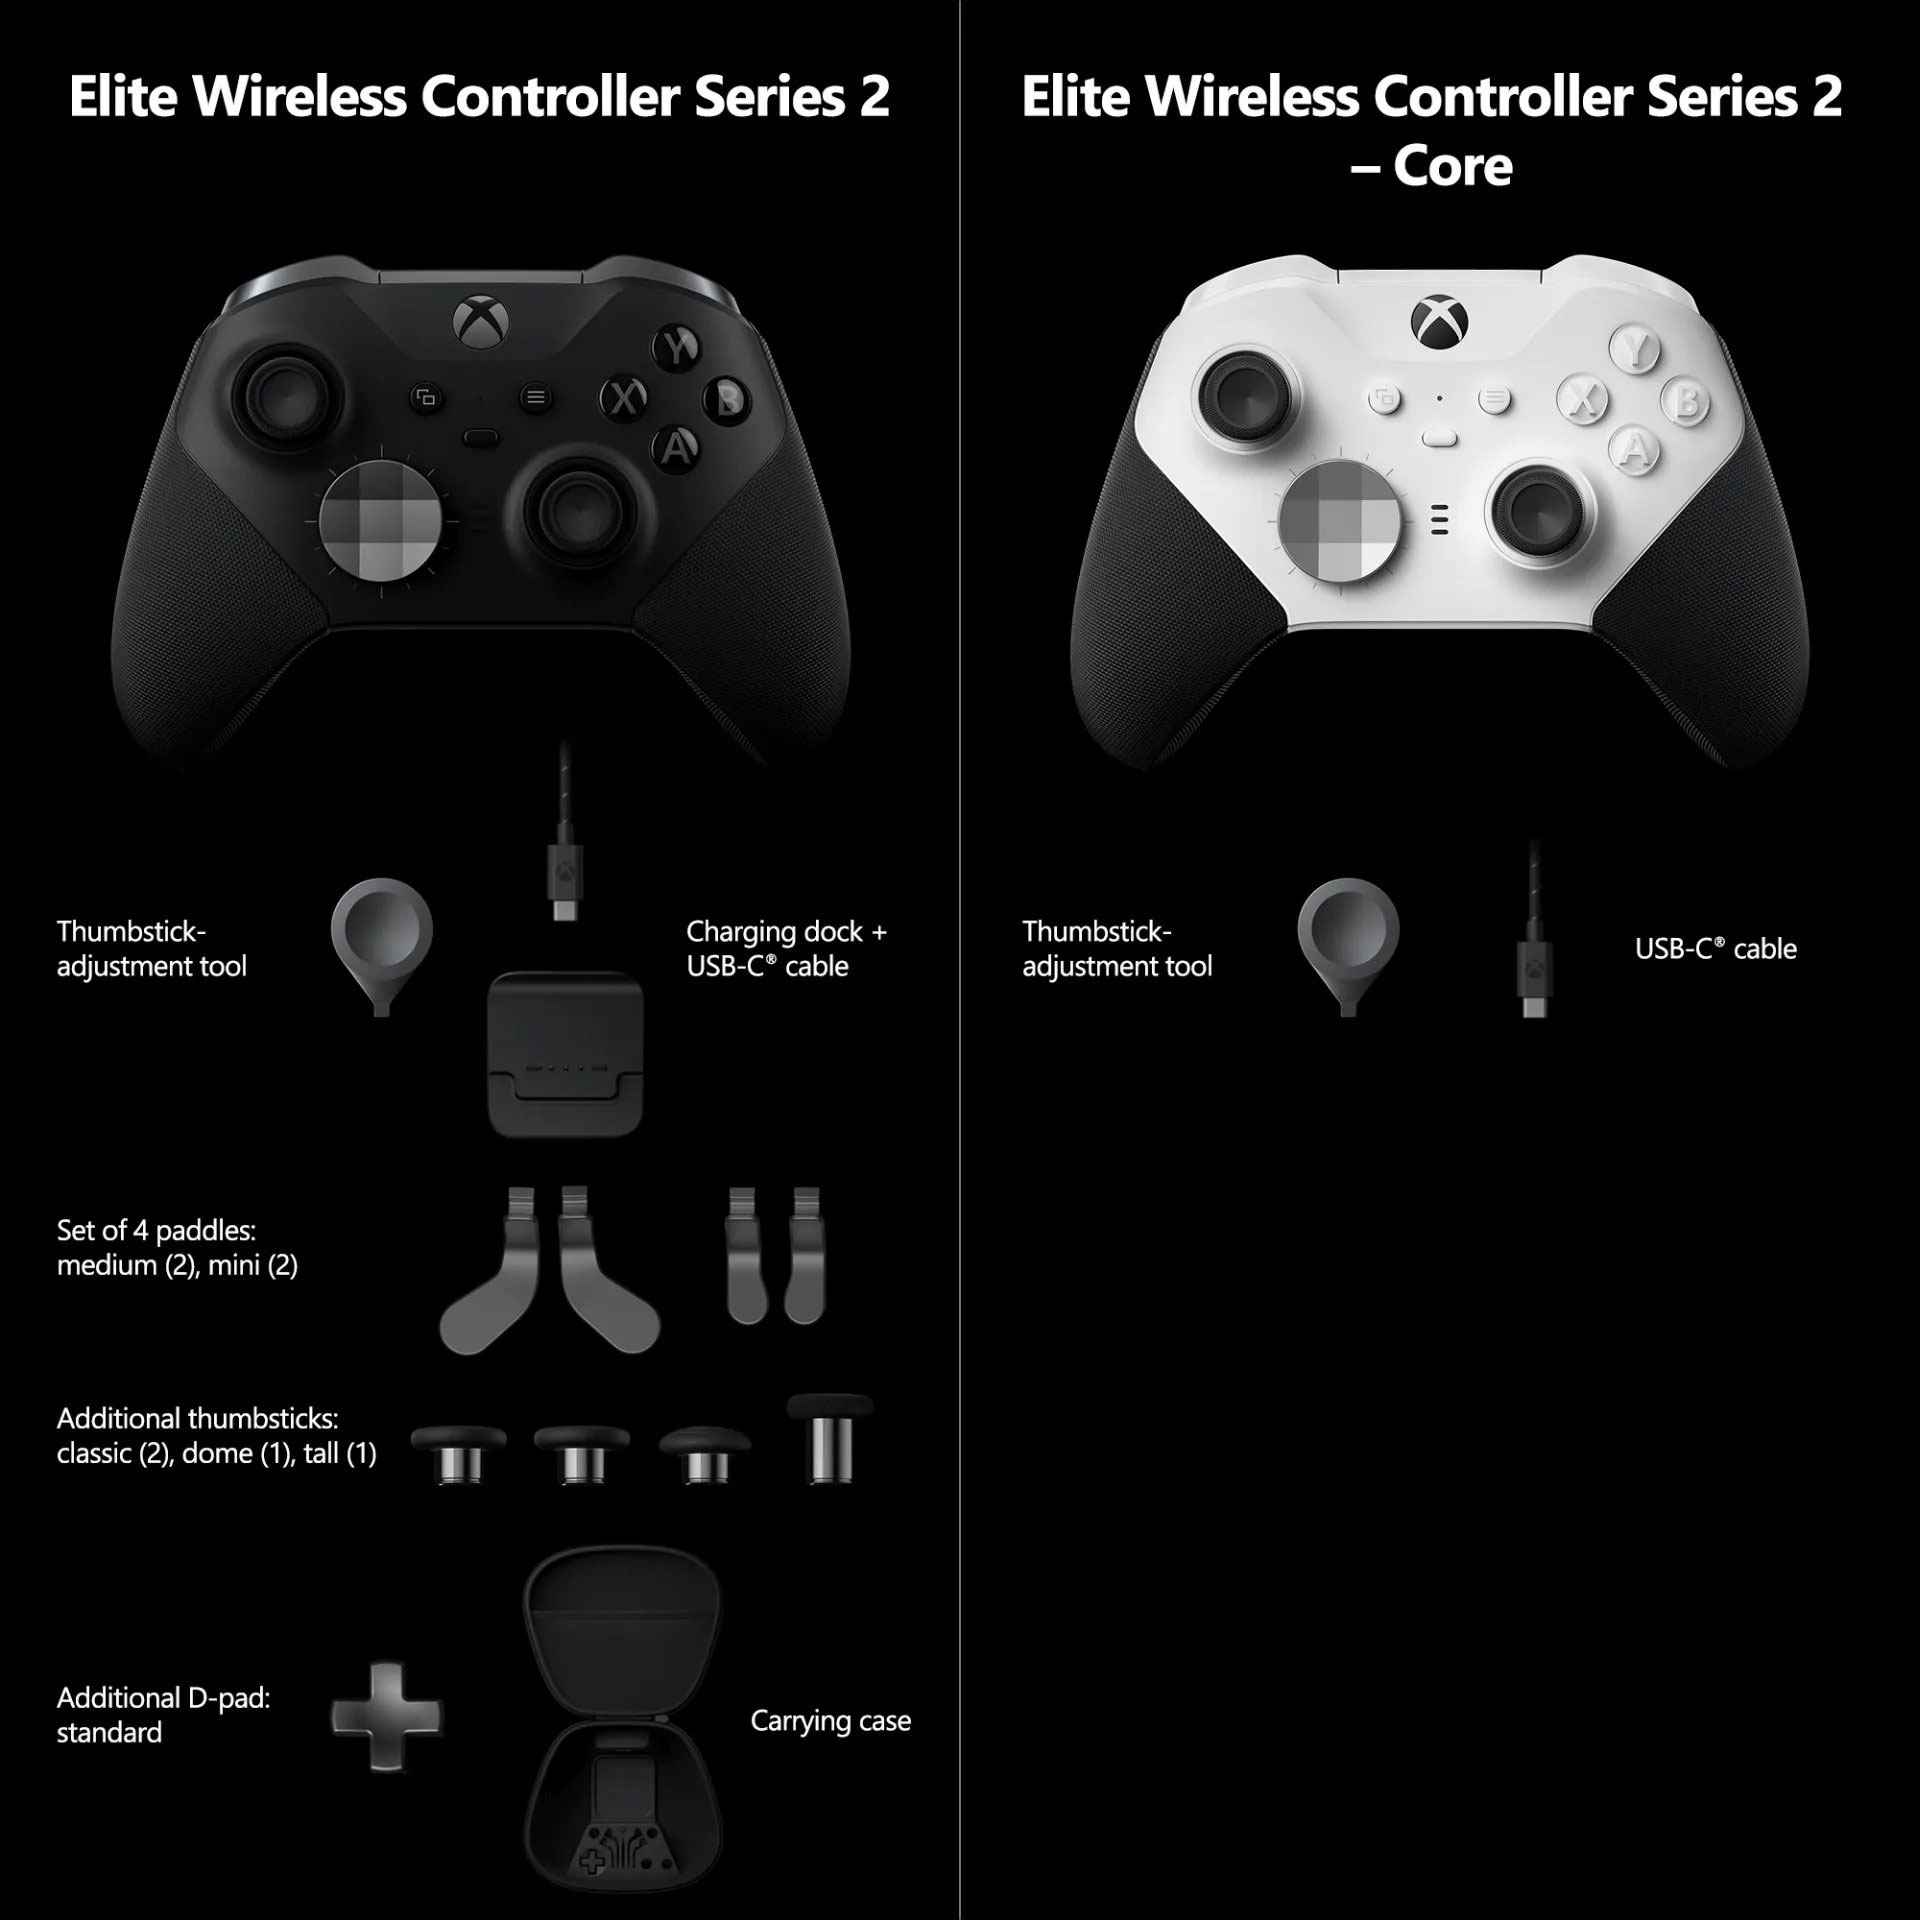 1662566910 55 Xbox Elite Wireless Controller Series 2 – Core introduced